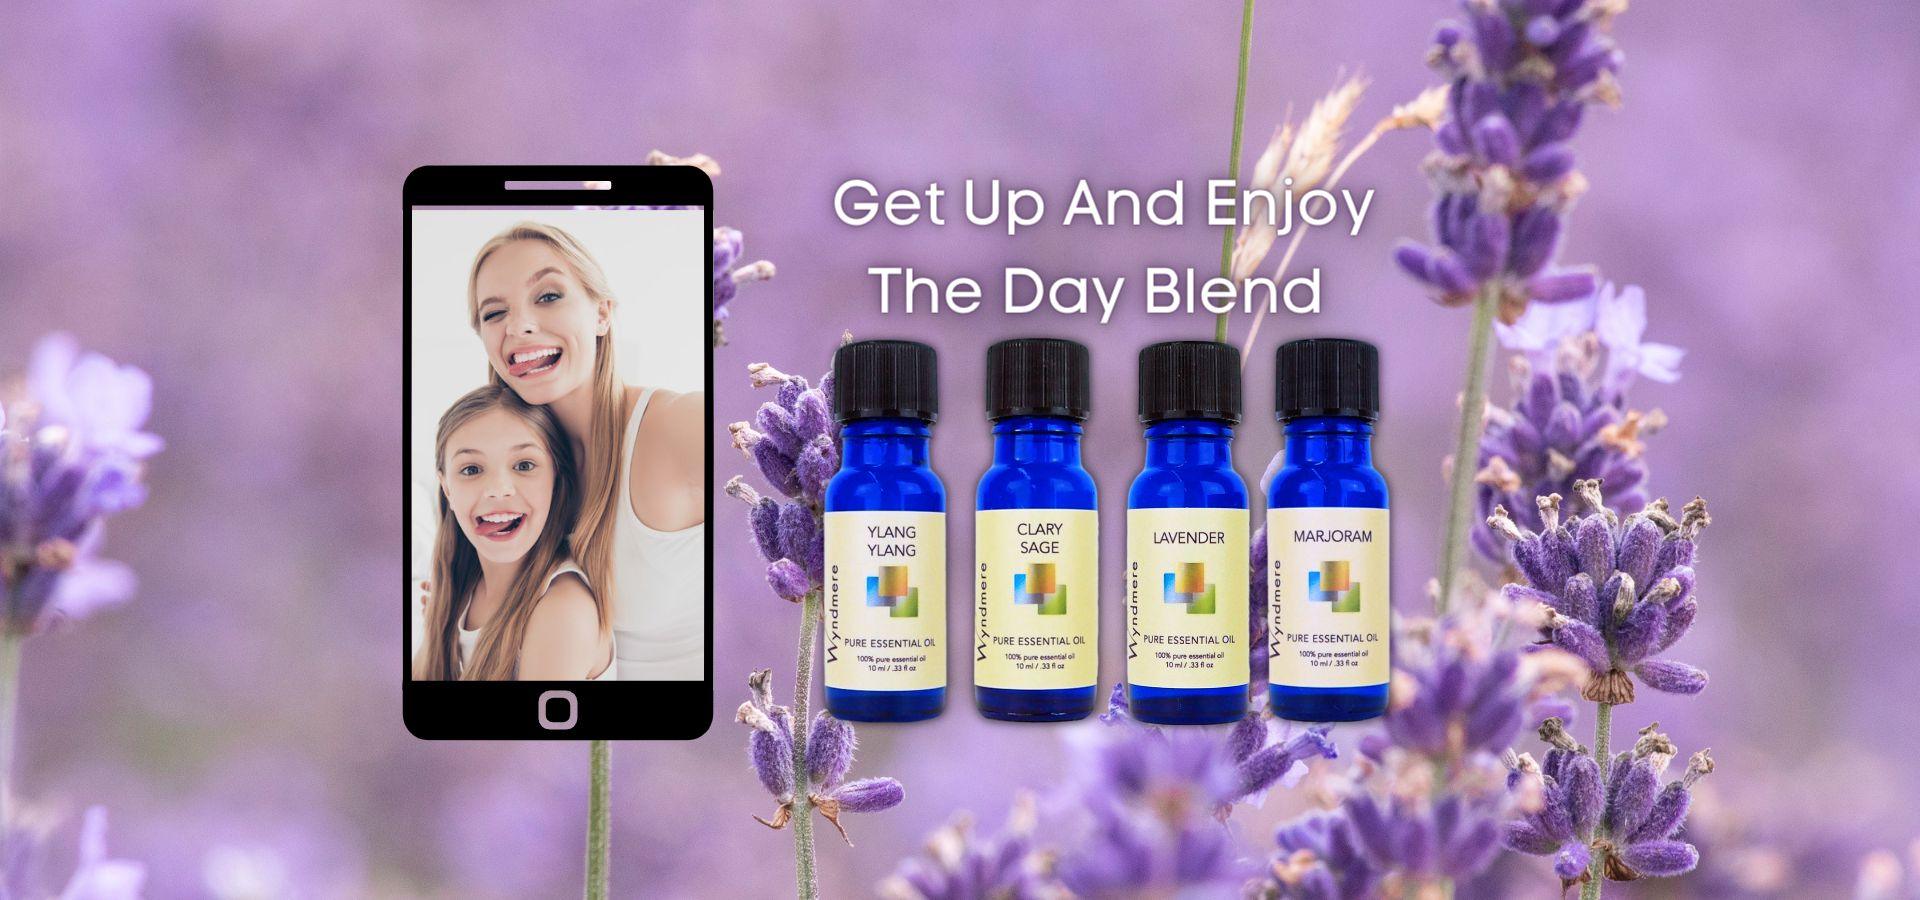 Wyndmere Naturals - Wake up and enjoy the day blend. Picture of mother and daughter taking a selfie being silly on a iphone frame. With lavender flower background. Bottles of lavender, ylang ylang, marjoram, clary sage essential oils. 